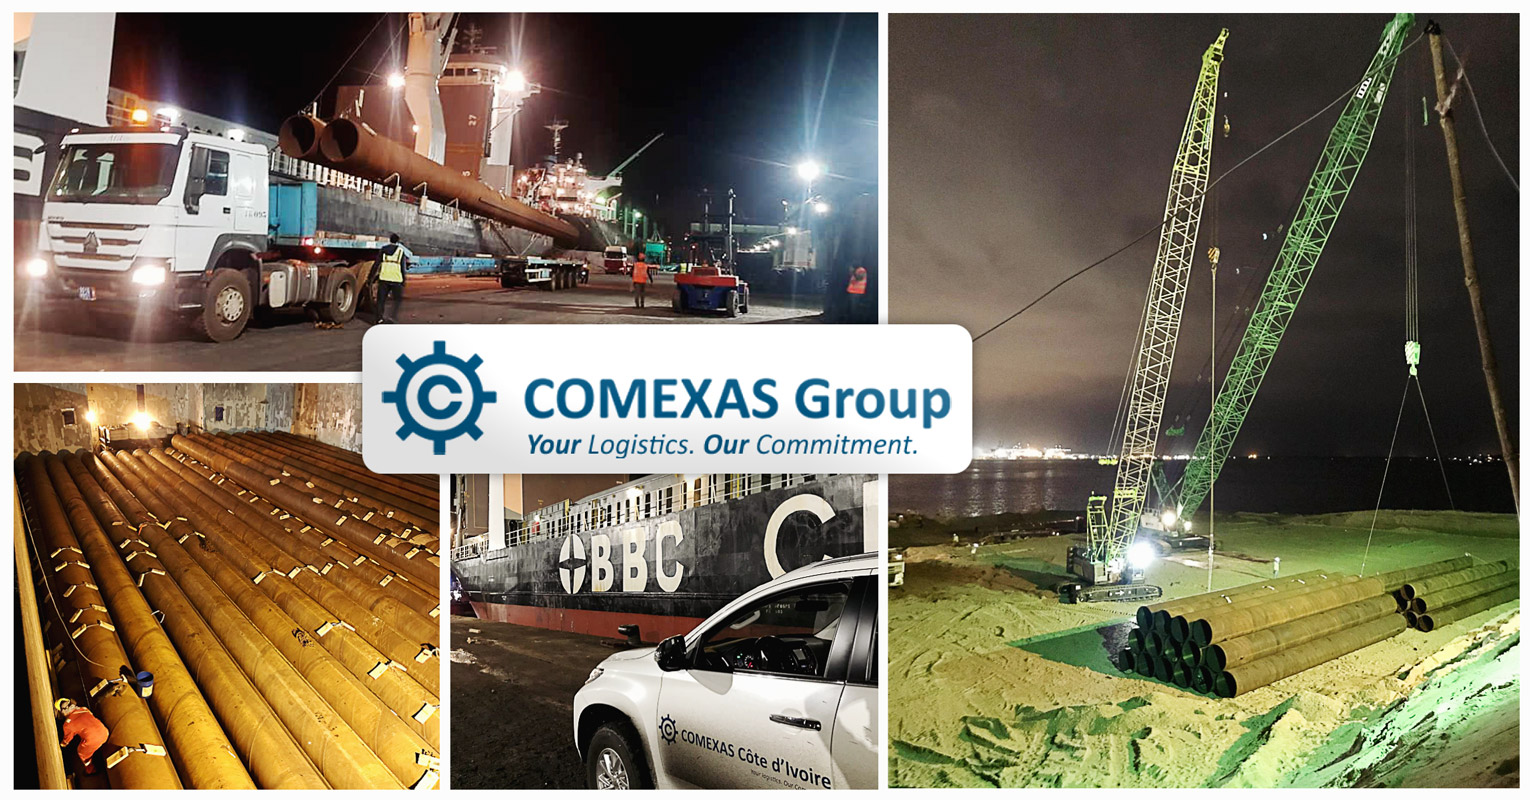 Comexas is Shipping 4,440-tons of Steel Piles up to 28 m Long for the New Grain Terminal in Abidjan